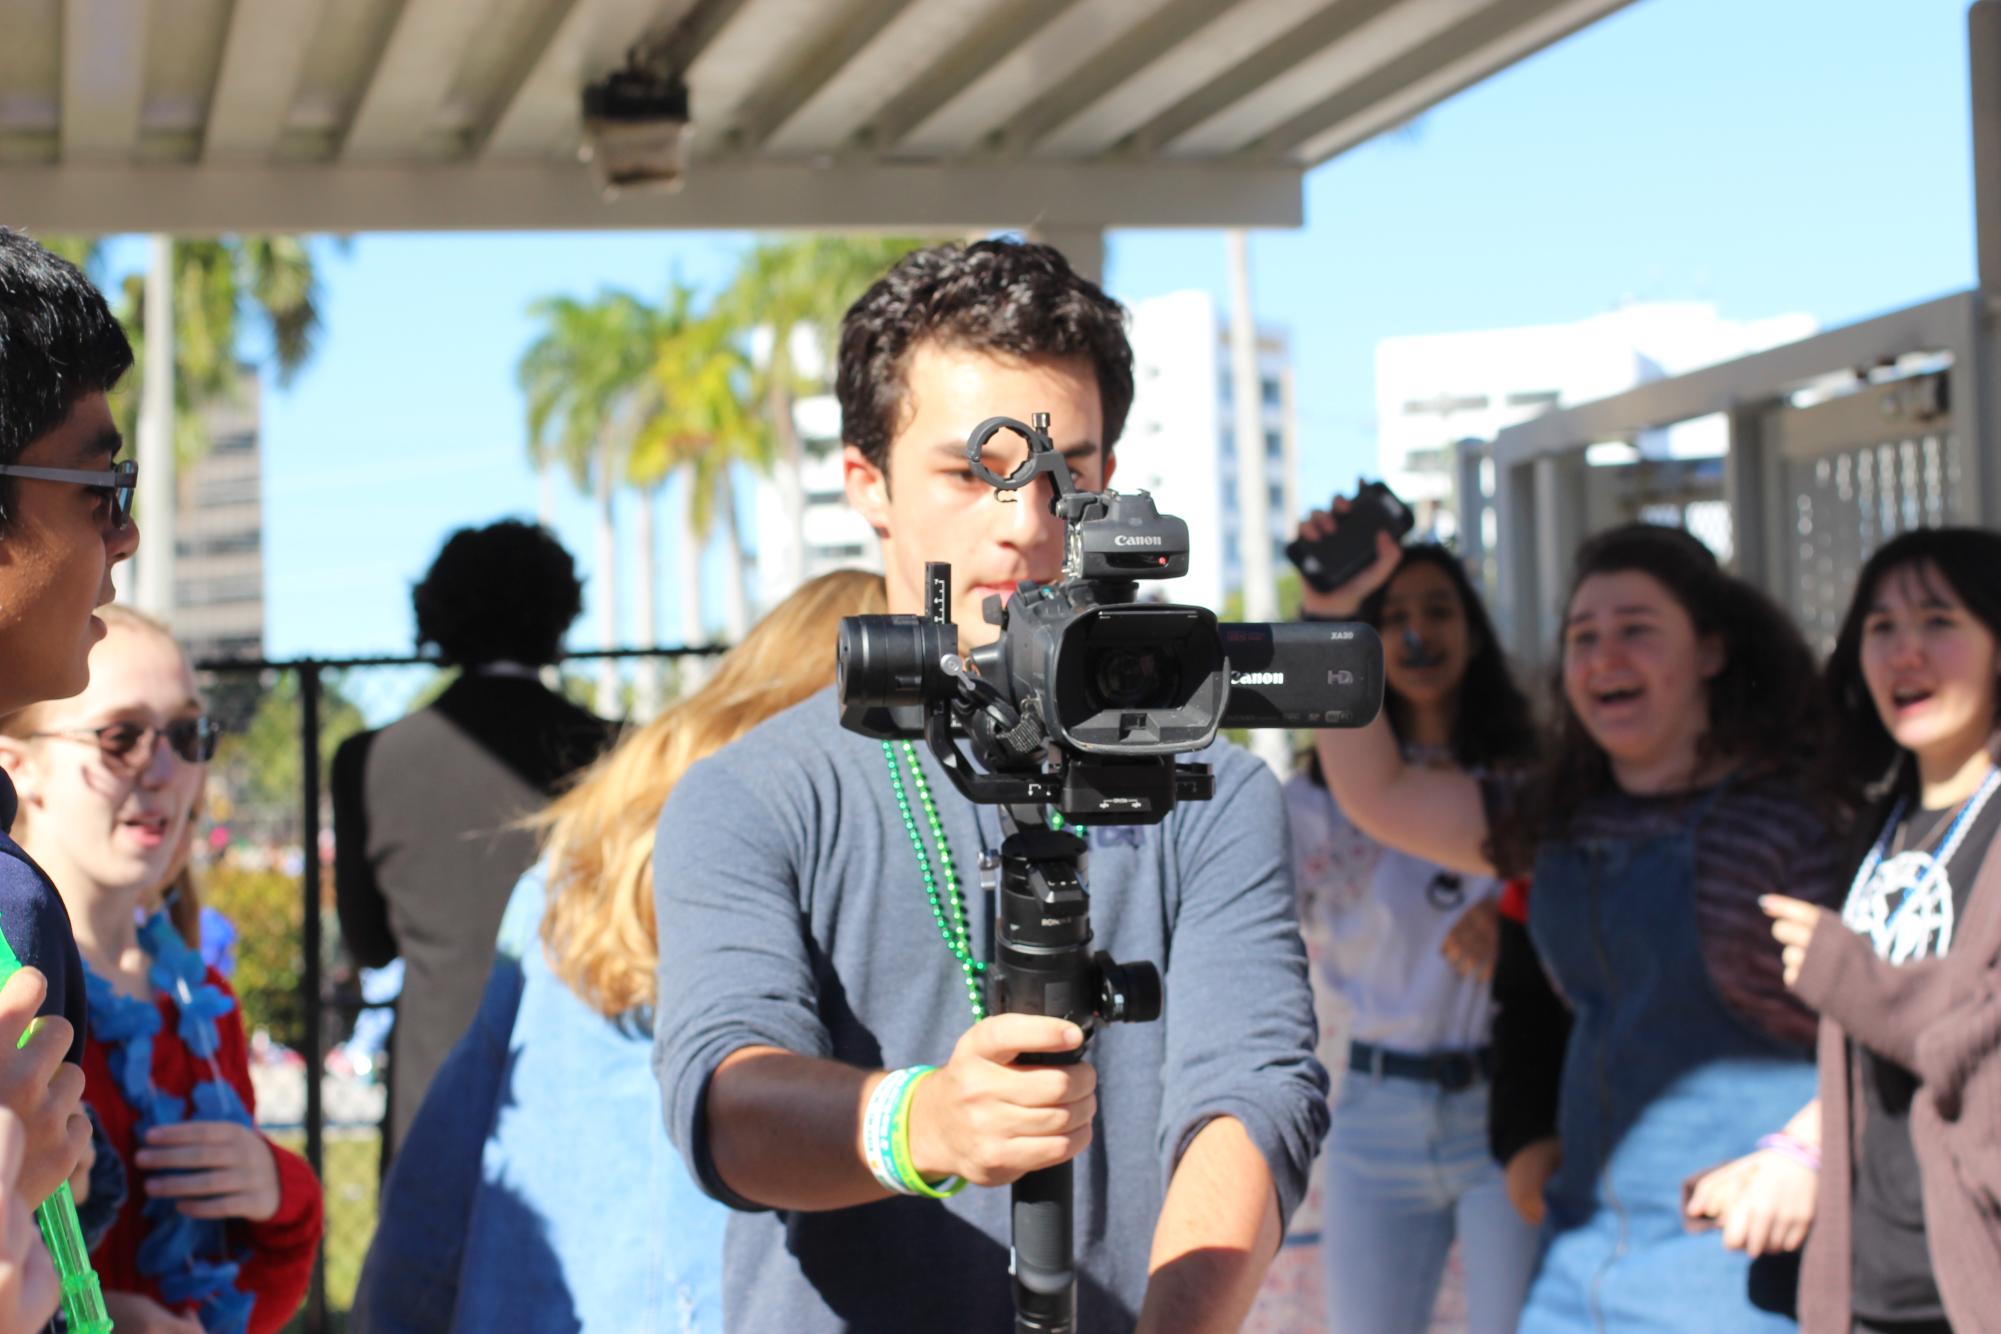 Alongside the growth of the Lip Dub, the parallel tradition of Seminole Ridge High School’s annual Lip Dub continued, which predates Dreyfoos’. The unofficial rivalry between the schools has reached audiences on Twitter and local radio, where listeners have been encouraged to vote for their favorite of the two.

“It was kind of exciting amongst ourselves to have a little sense of competition,” Goldstick said of the so-called feud. “You know, setting the bar high as you’re working to create it.”

More development on the Seminole Ridge rivalry will come in future versions of this article.
